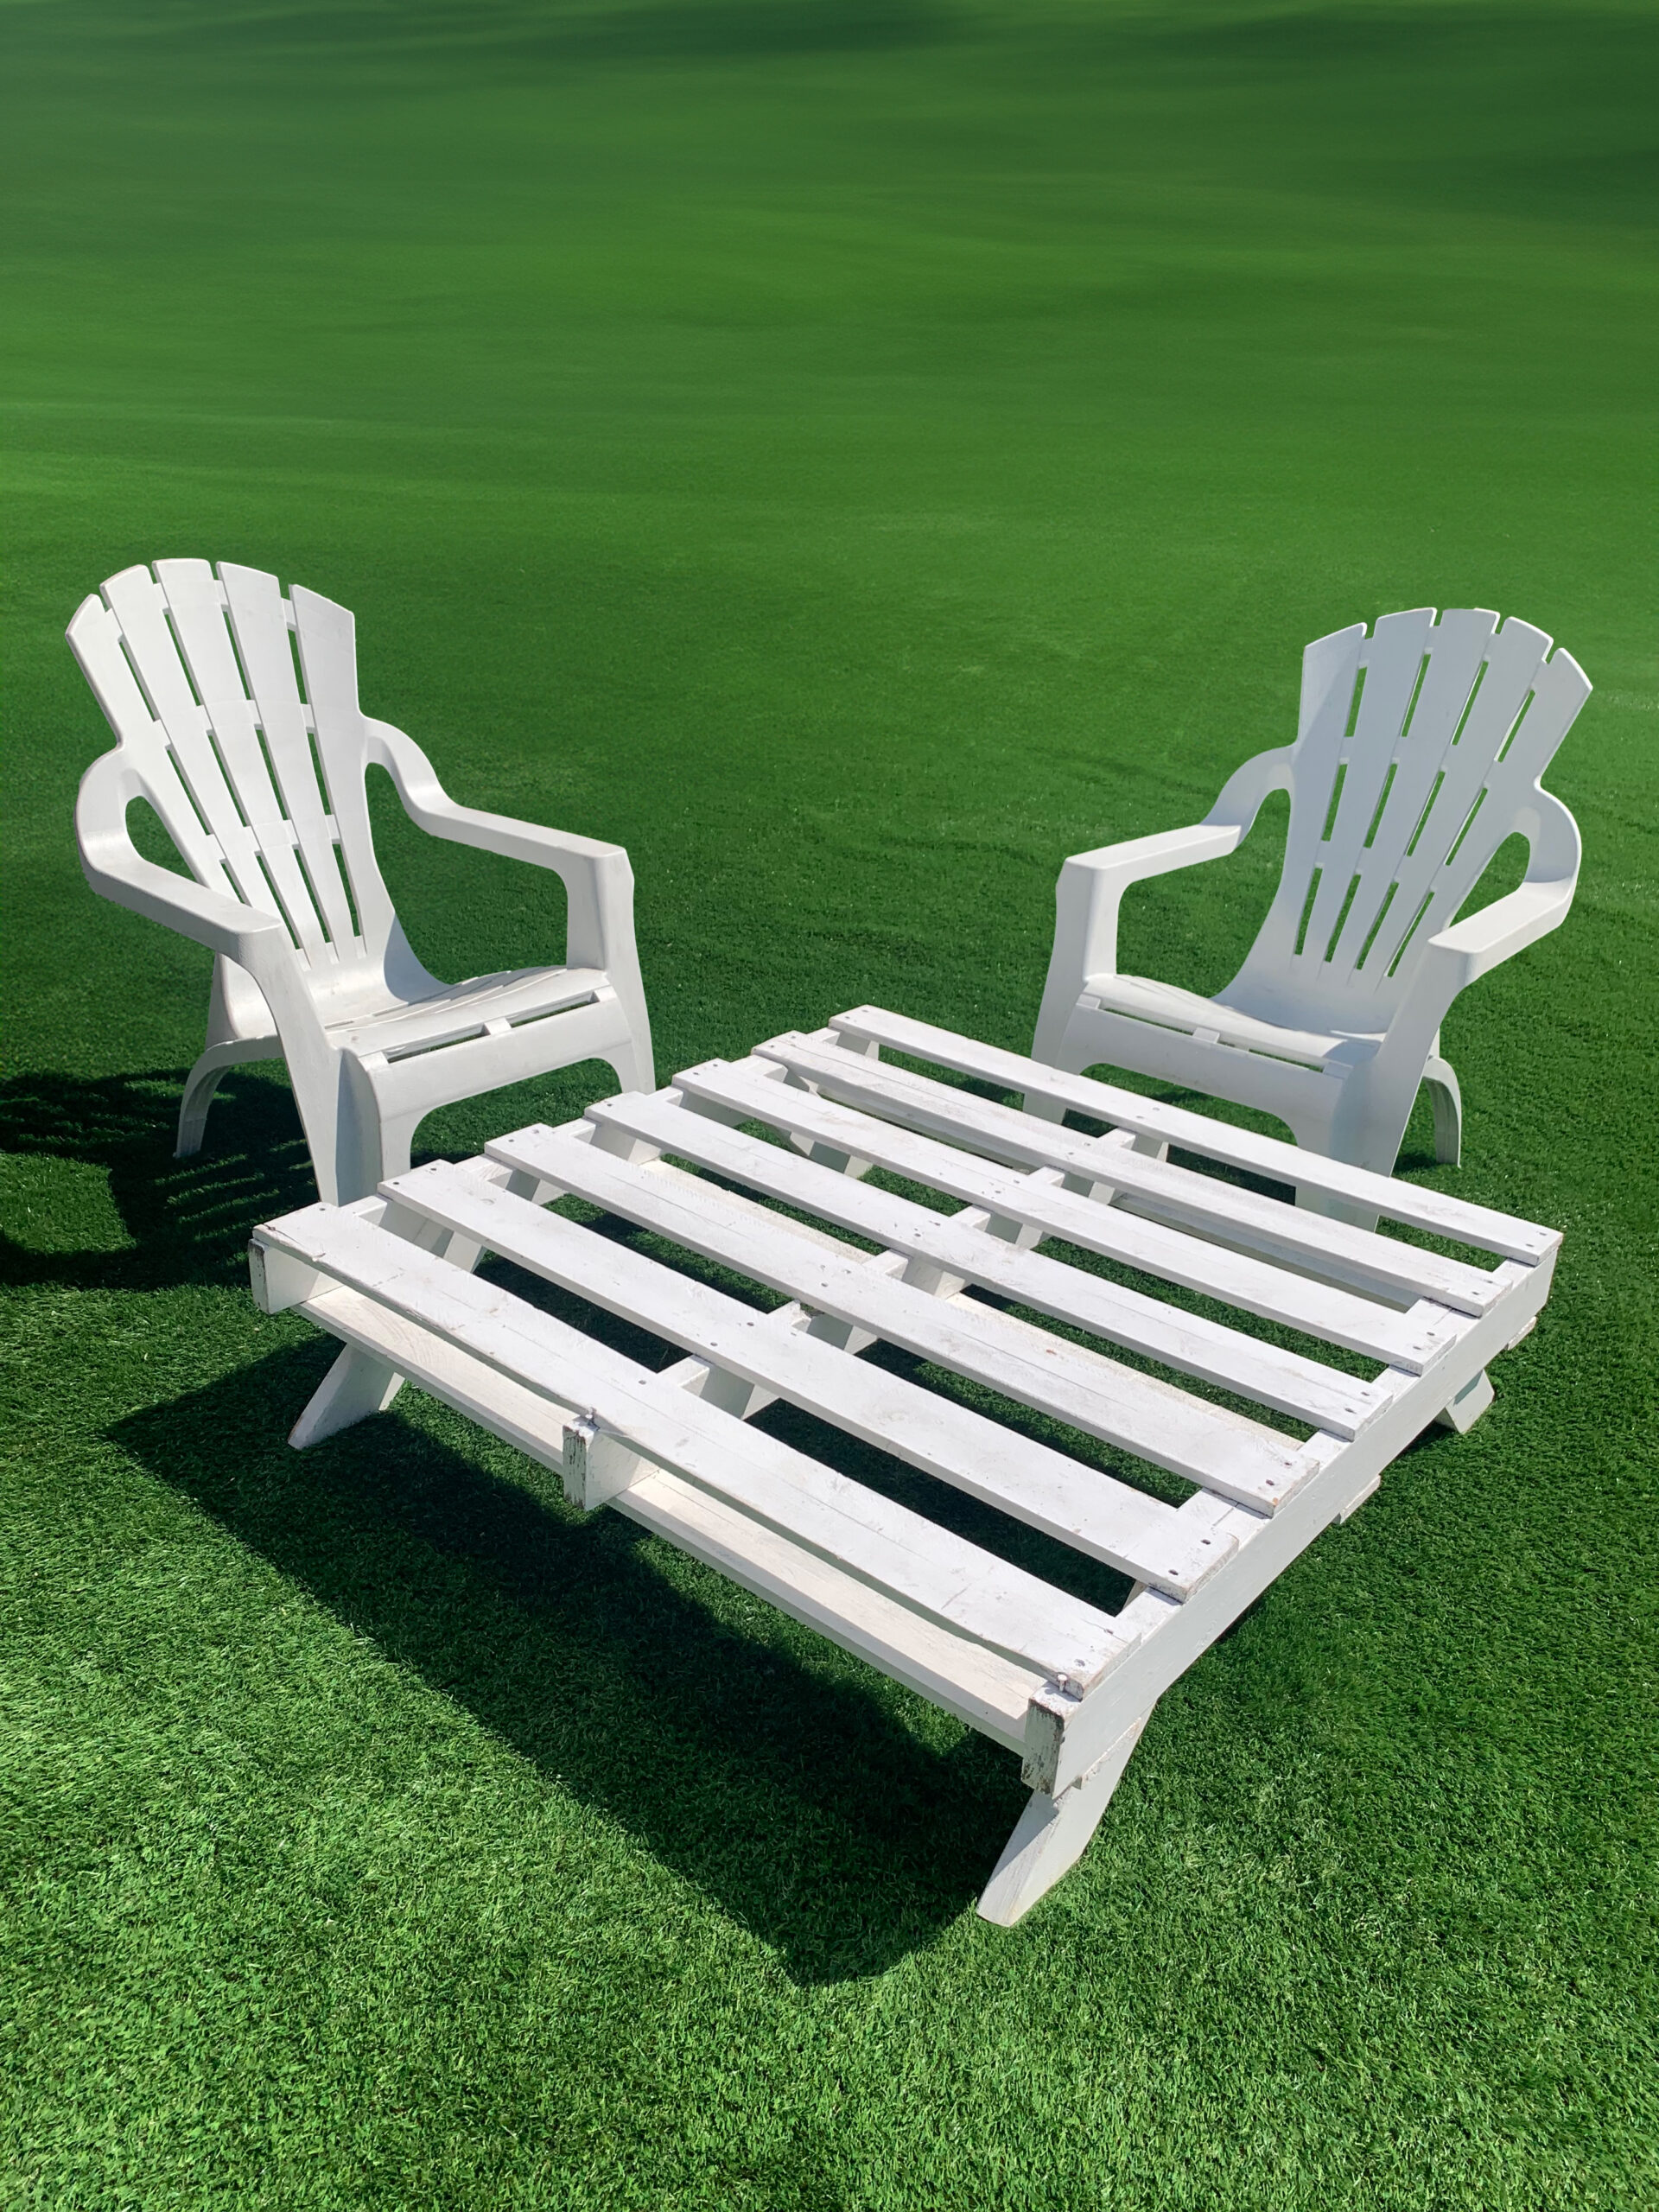 Pallet Picnic Table on grass styled with chairs for picnic setting